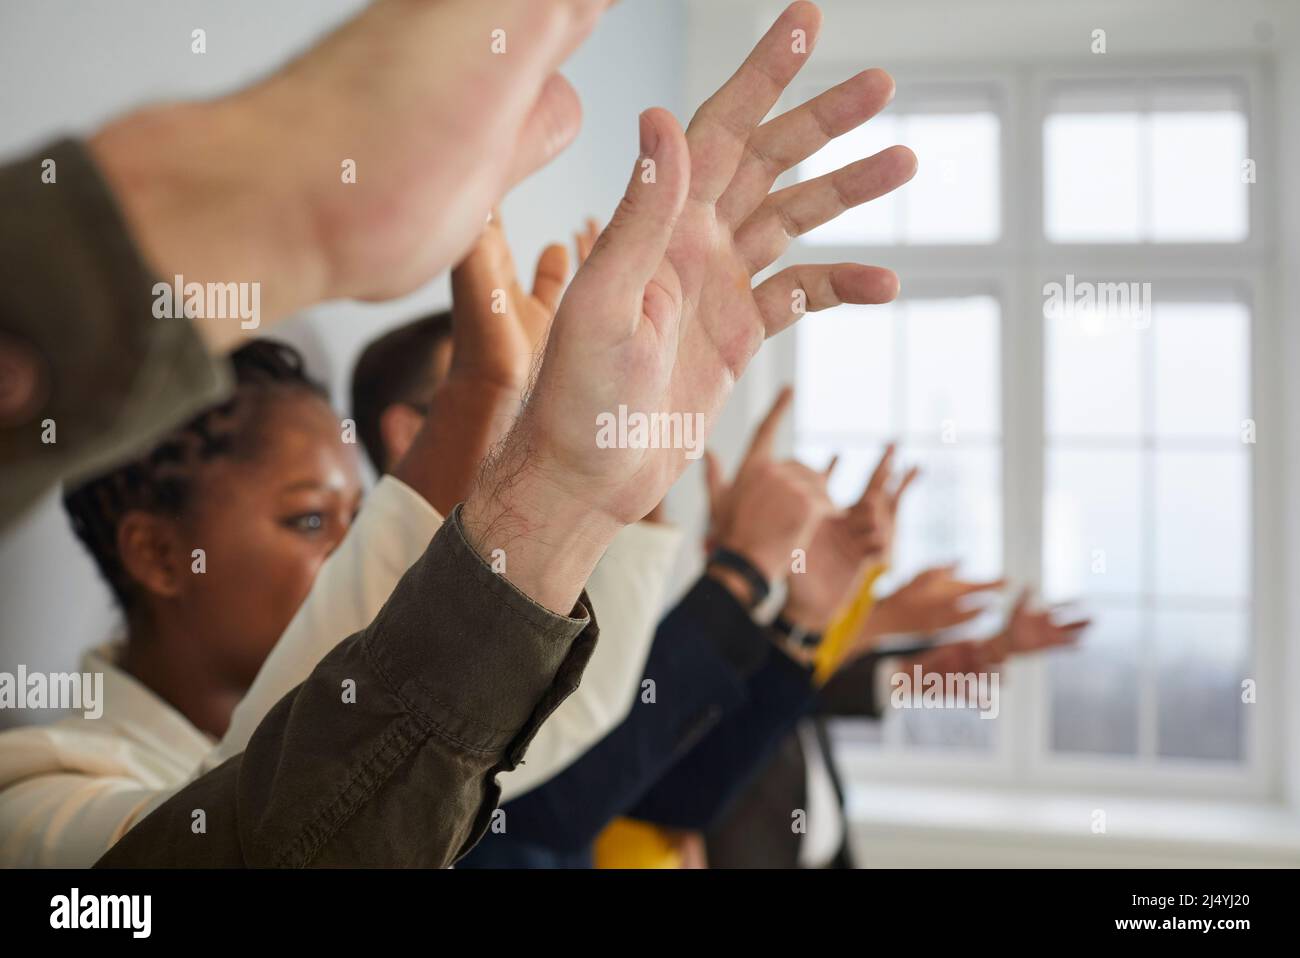 Diverse crowd of people raising their hands to ask questions at public conference Stock Photo